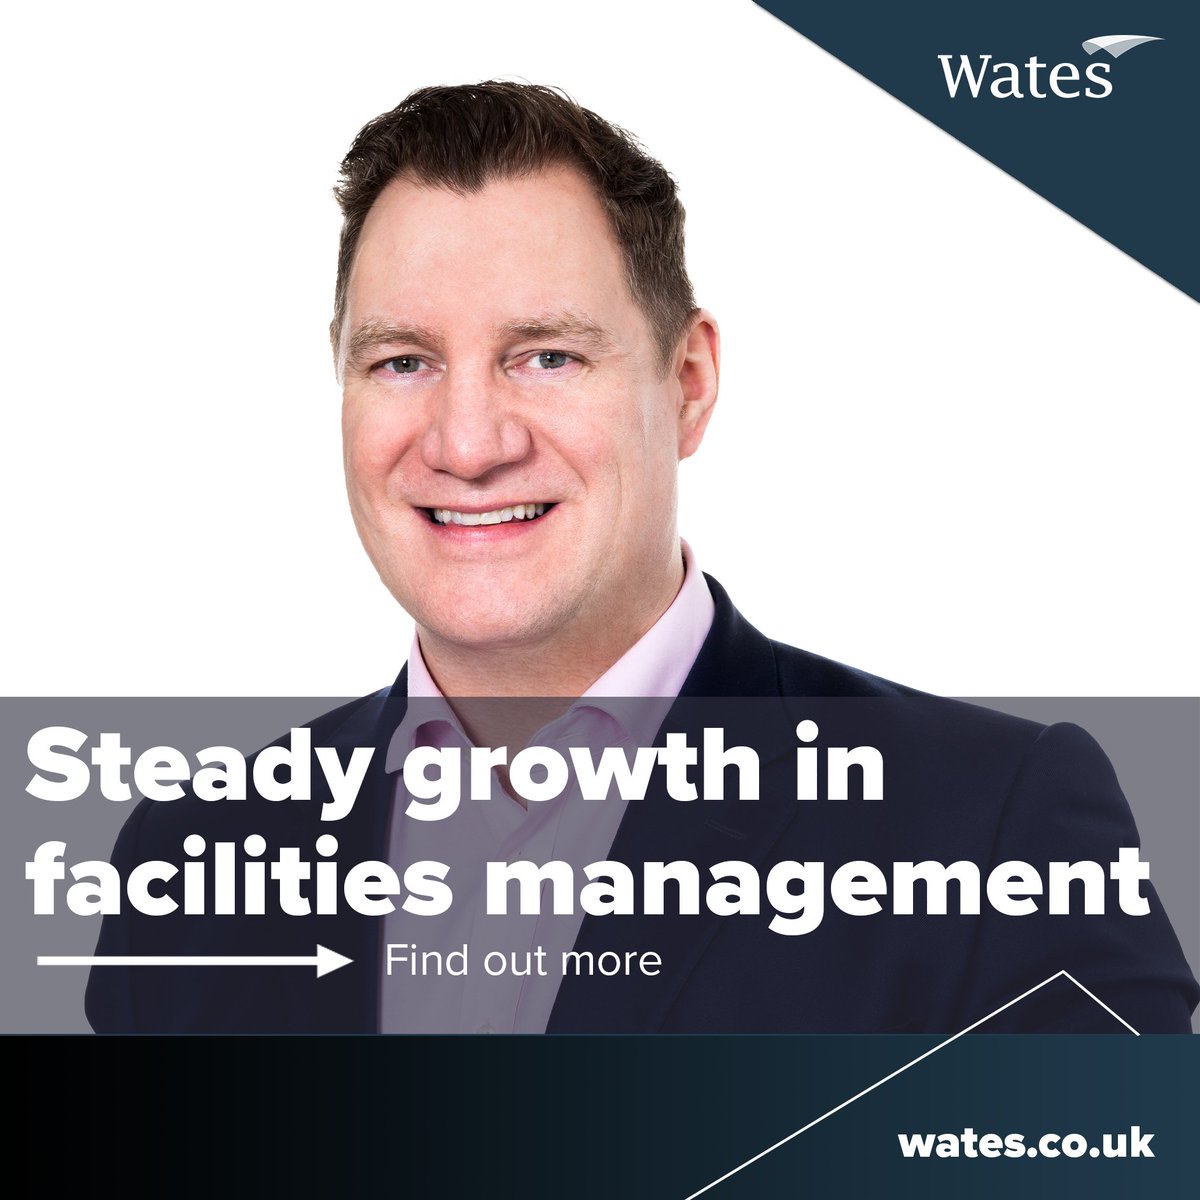 Managing Director of our #FM business, Antony Collett spoke to @fmjtoday about the advantages of organisations like Wates, which uses its knowledge and experience of whole building lifecycle to develop a #bespoke approach for our #customers' needs. eu1.hubs.ly/H08vNQ20.